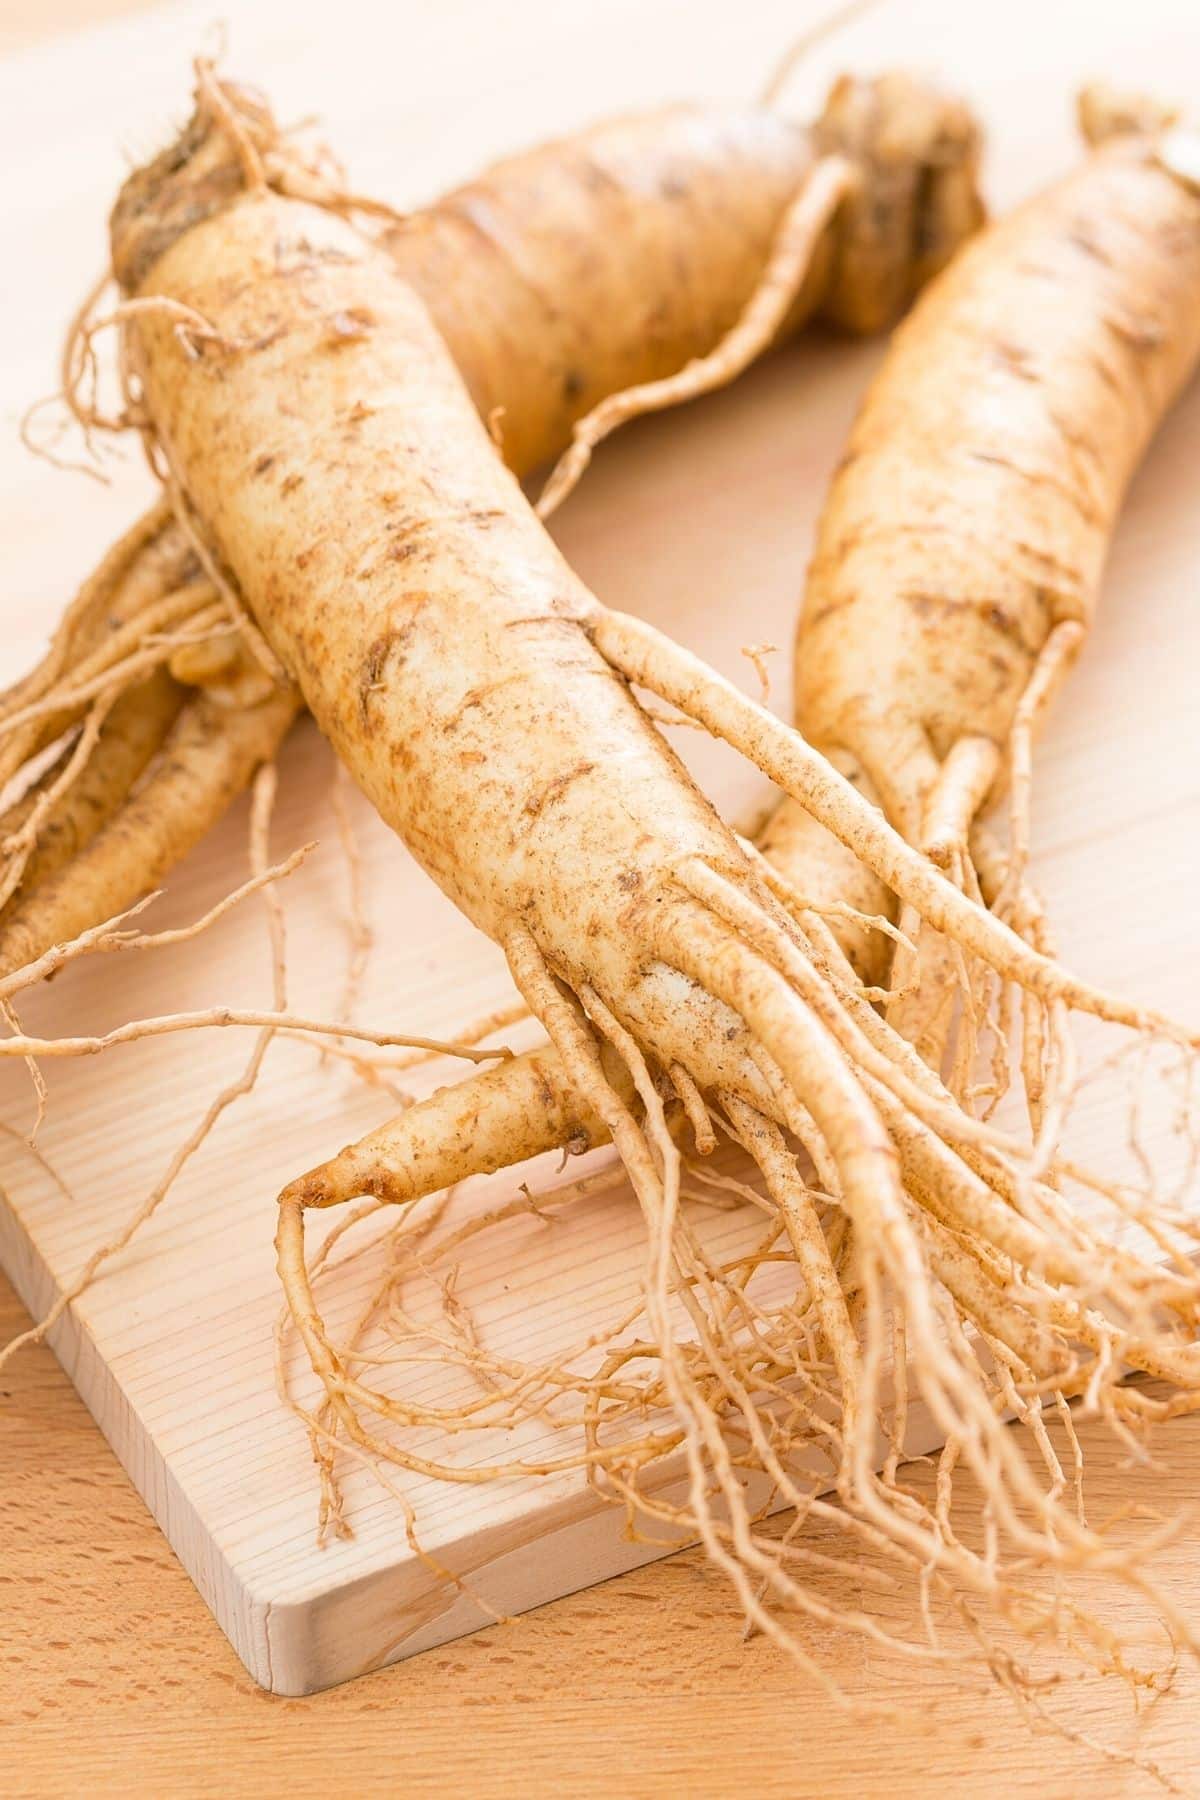 ginseng root on table.